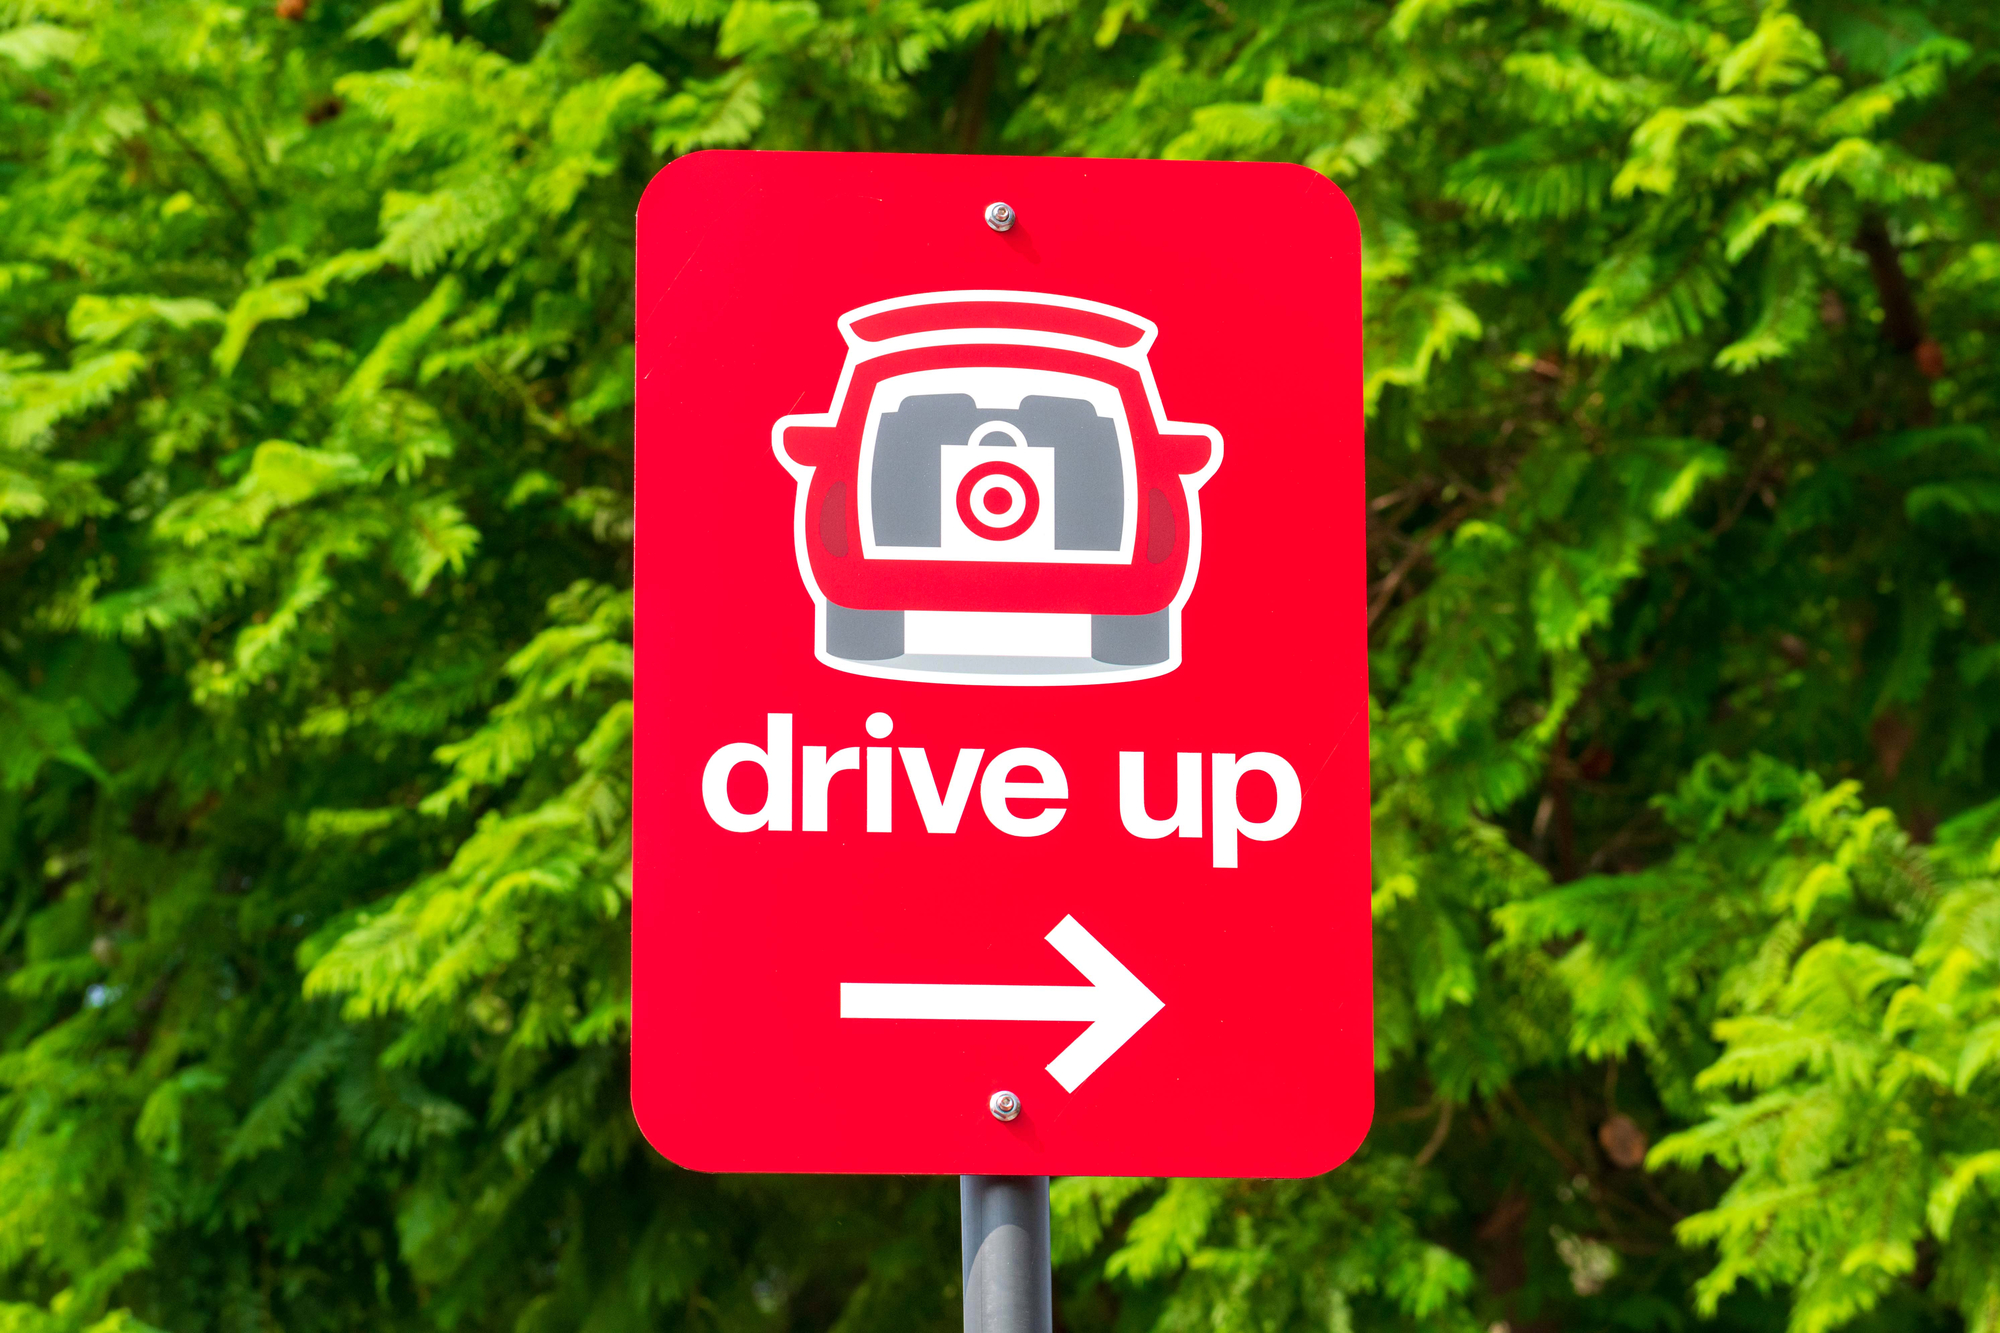 Drive Up sign informs Target supermarket online shoppers about convenient reserved parking spot for online orders pick up